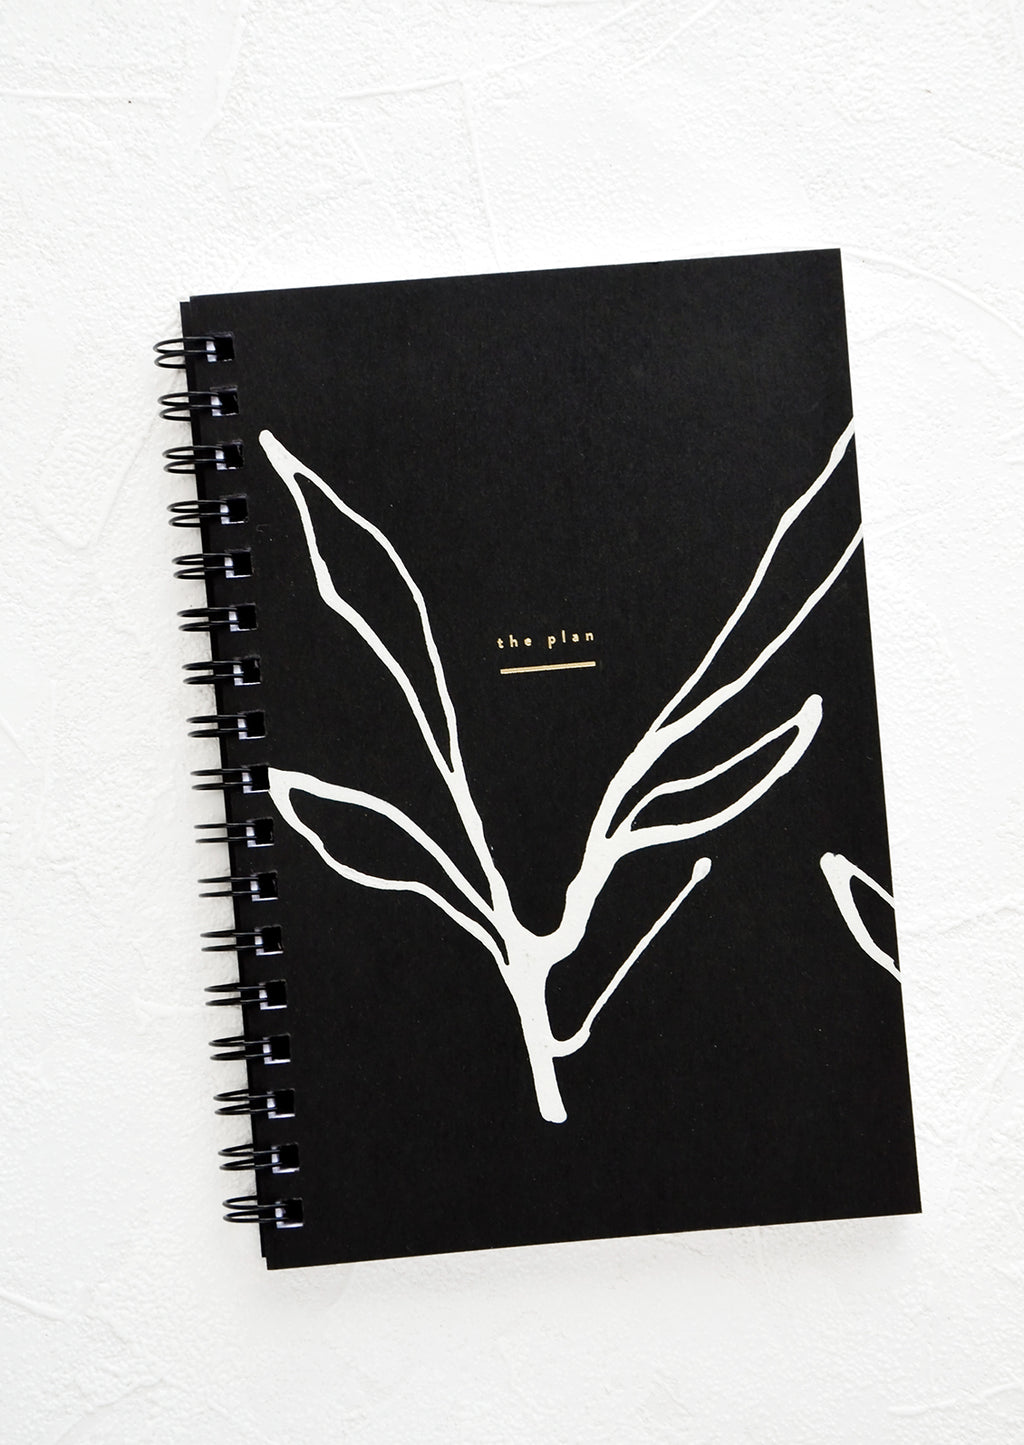 Seaweed Stroke: Spiral bound planner with black cover and hand-painted, abstract seaweed outline in white